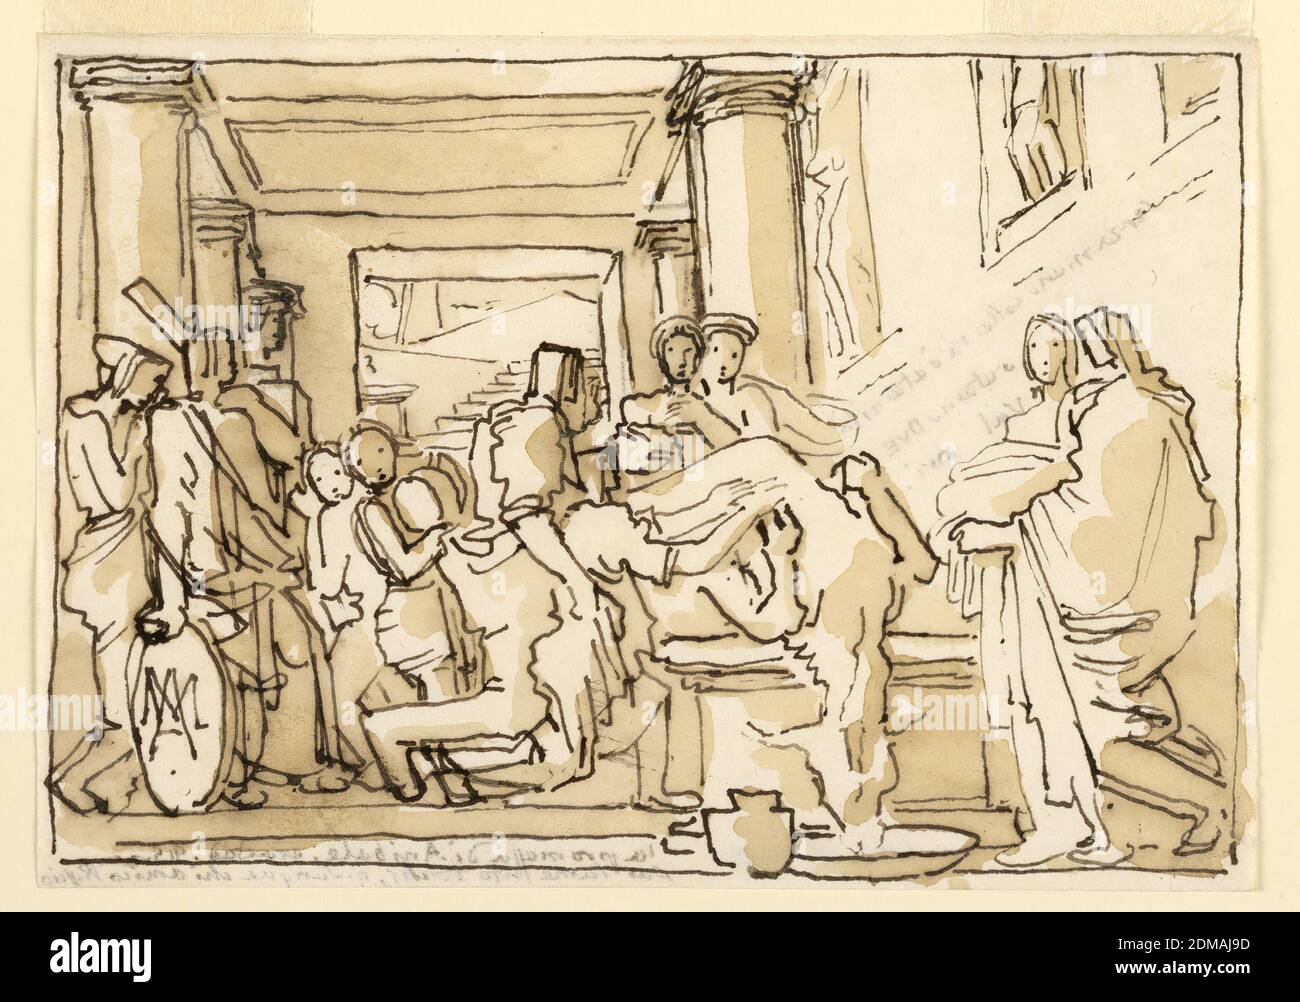 Sketch, Funereal or Deathbed Scene in Classical Interior, Fortunato Duranti, Italian, 1787 - 1863, Pen and ink, brush and sepia wash on paper, Sketch, Funereal or Deathbed Scene in Classical Interior, Rome, Italy, 1820–1850, Drawing Stock Photo